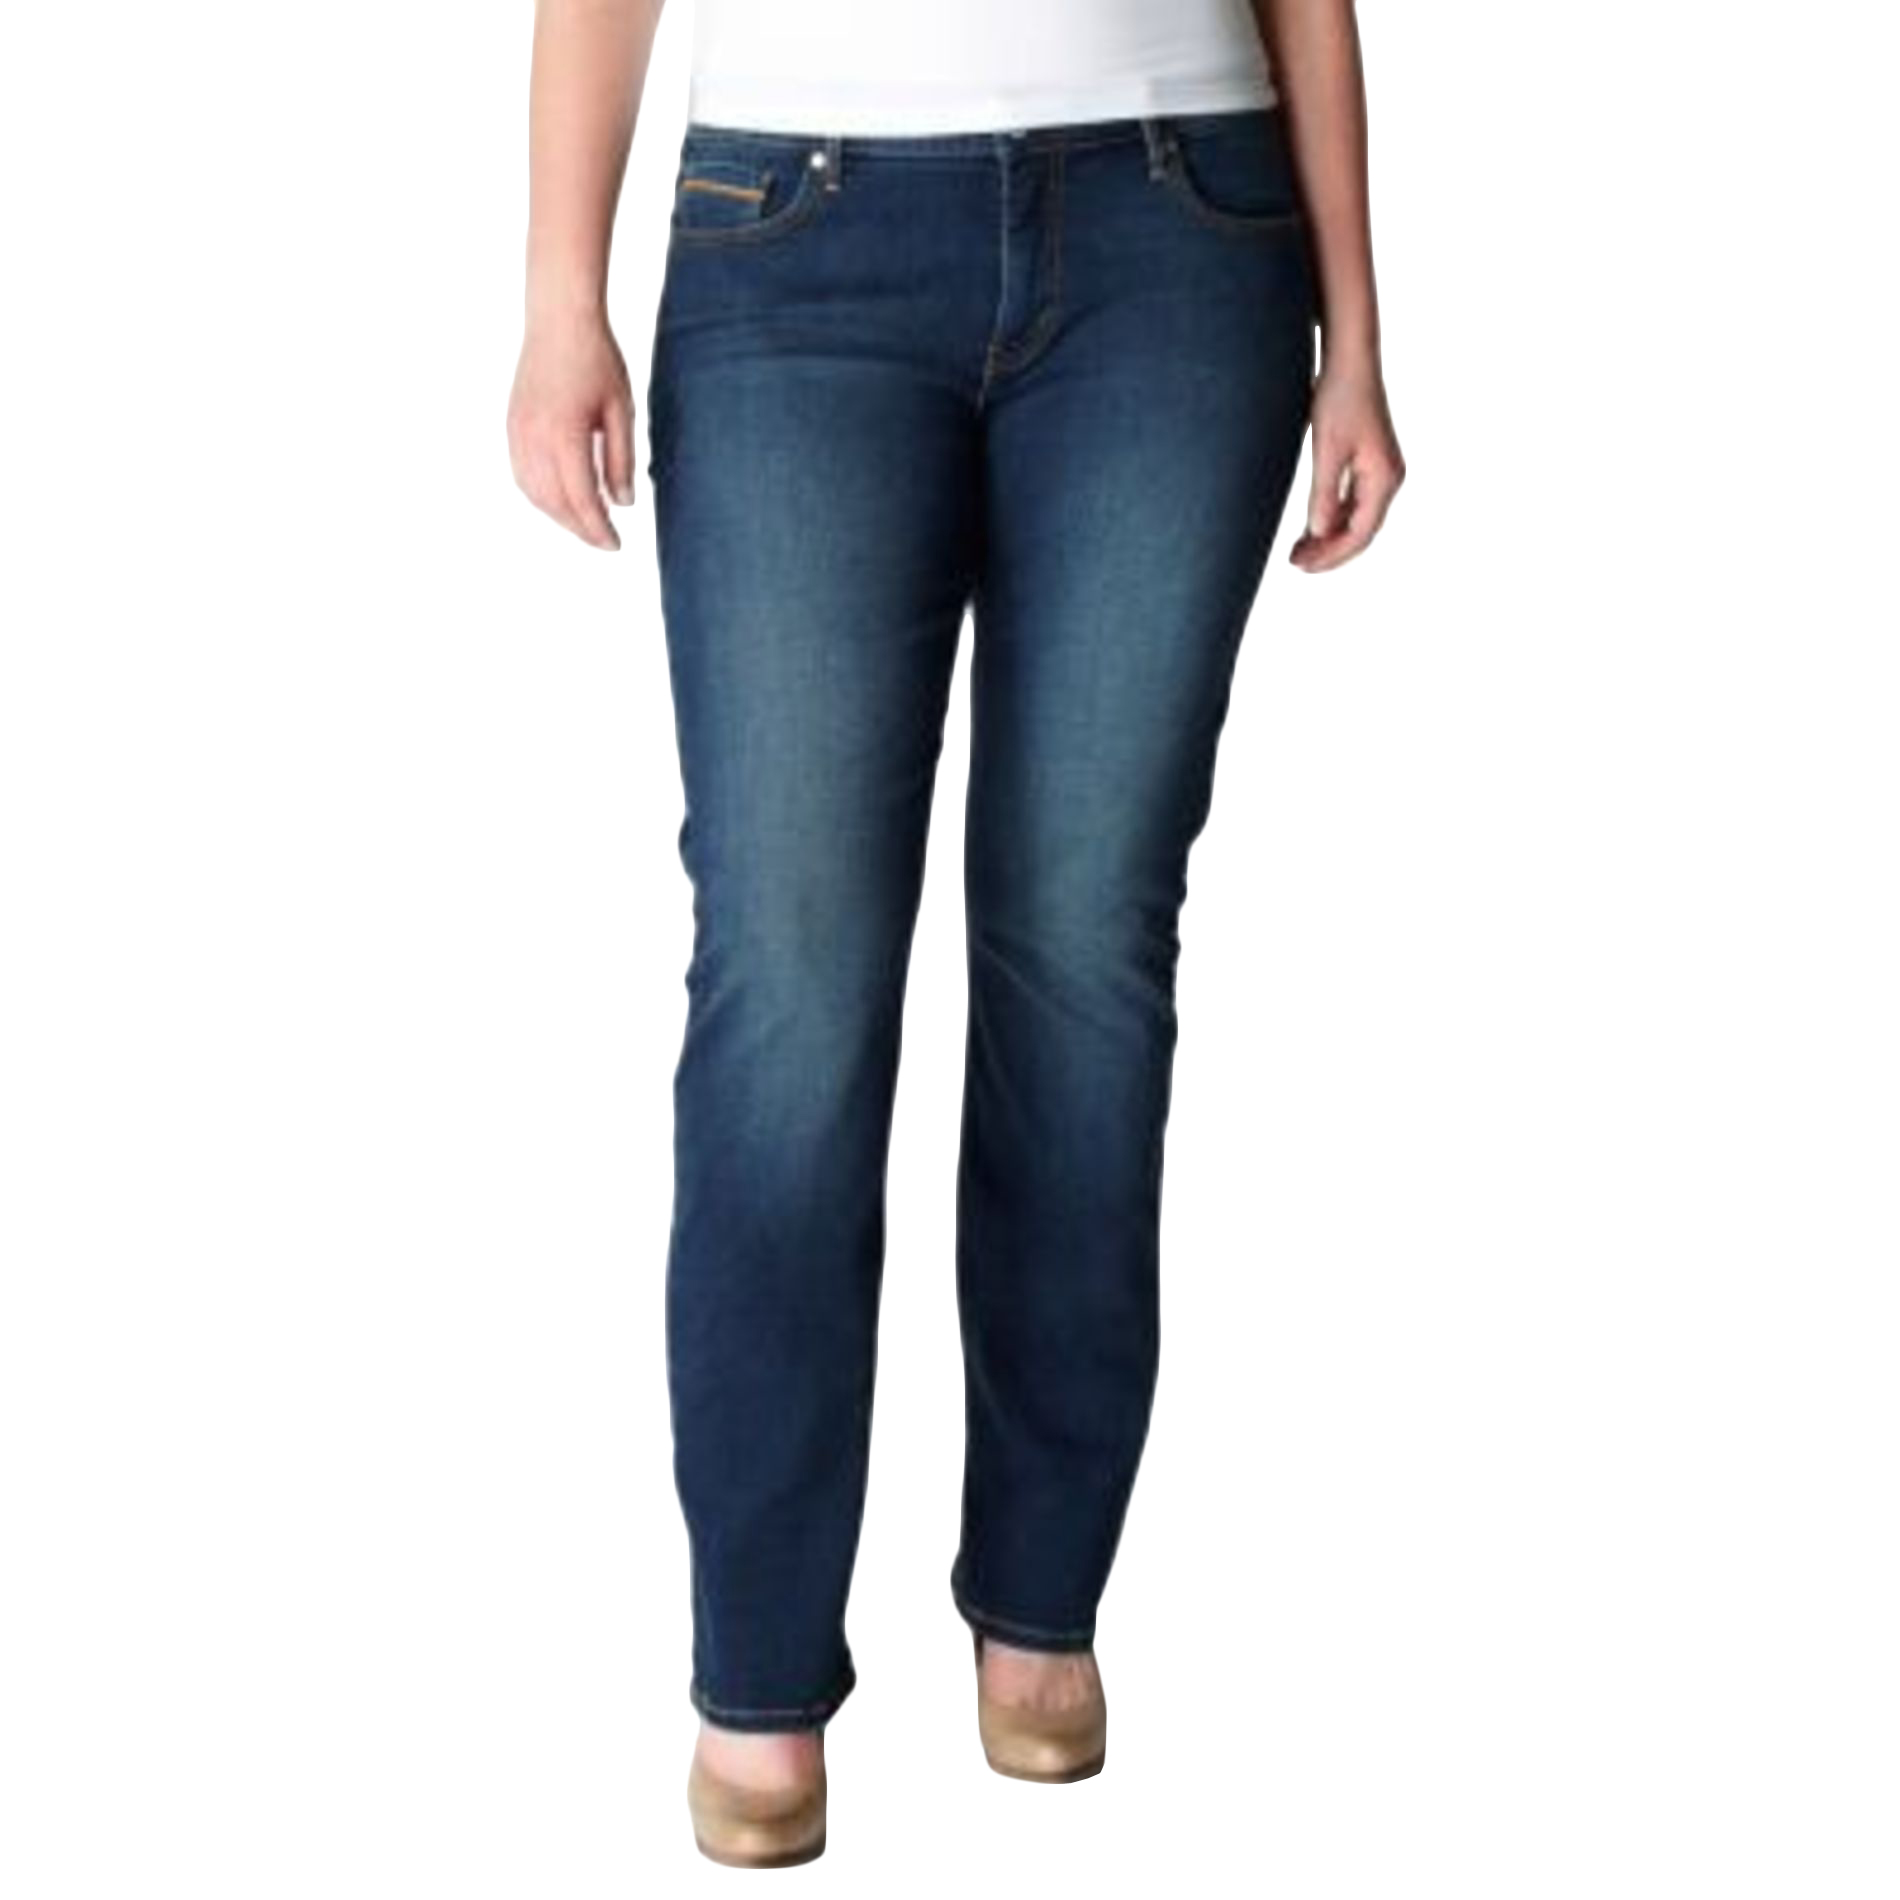 Levi's 512 Women’s Plus Perfectly Shaping Boot Cut Jeans